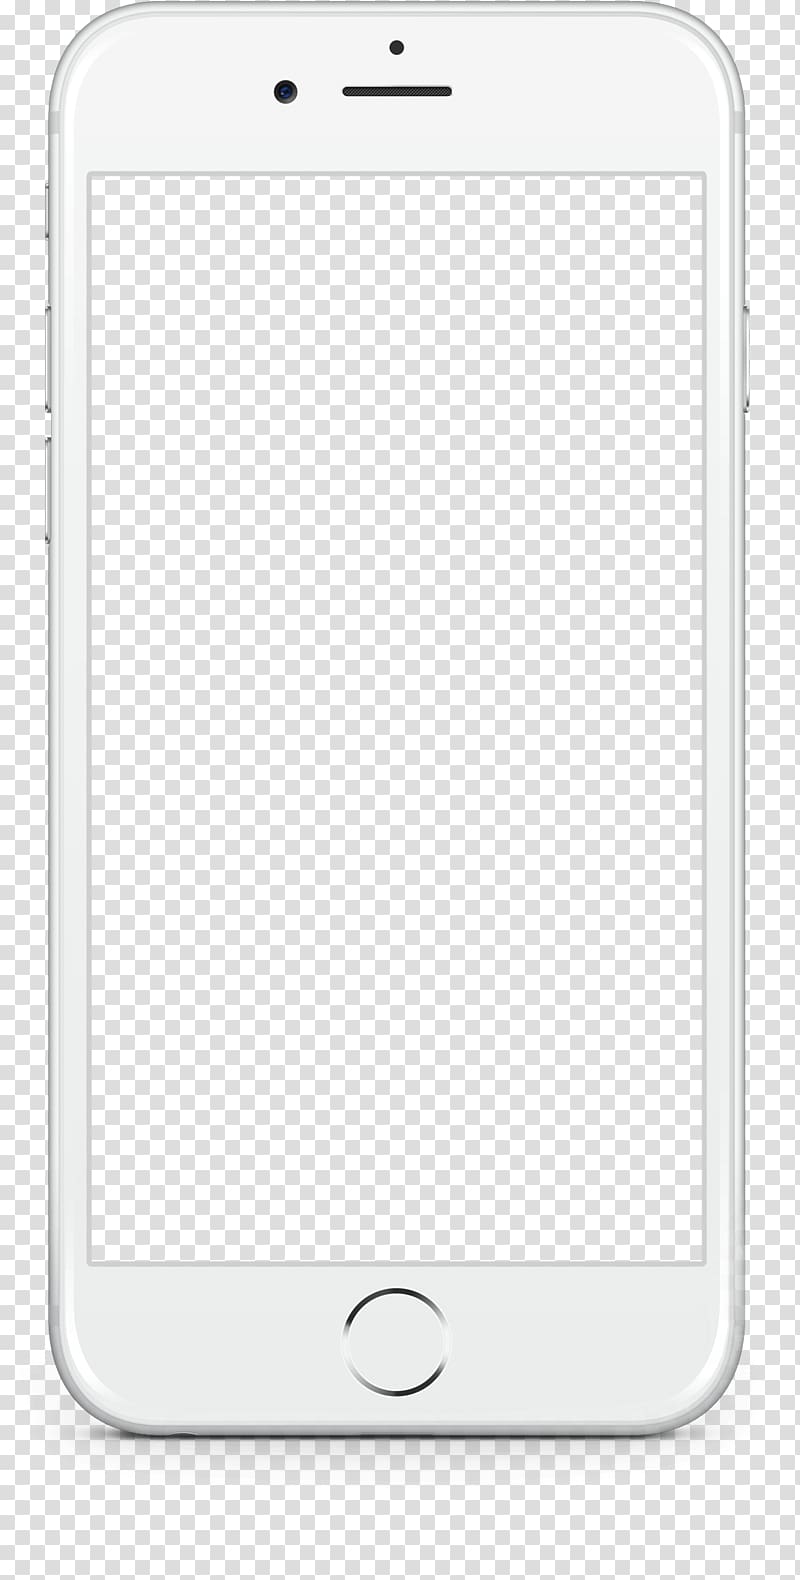 Iphone Digitizer Iphone 6 Smartphone Iphone Transparent Background Png Clipart Hiclipart